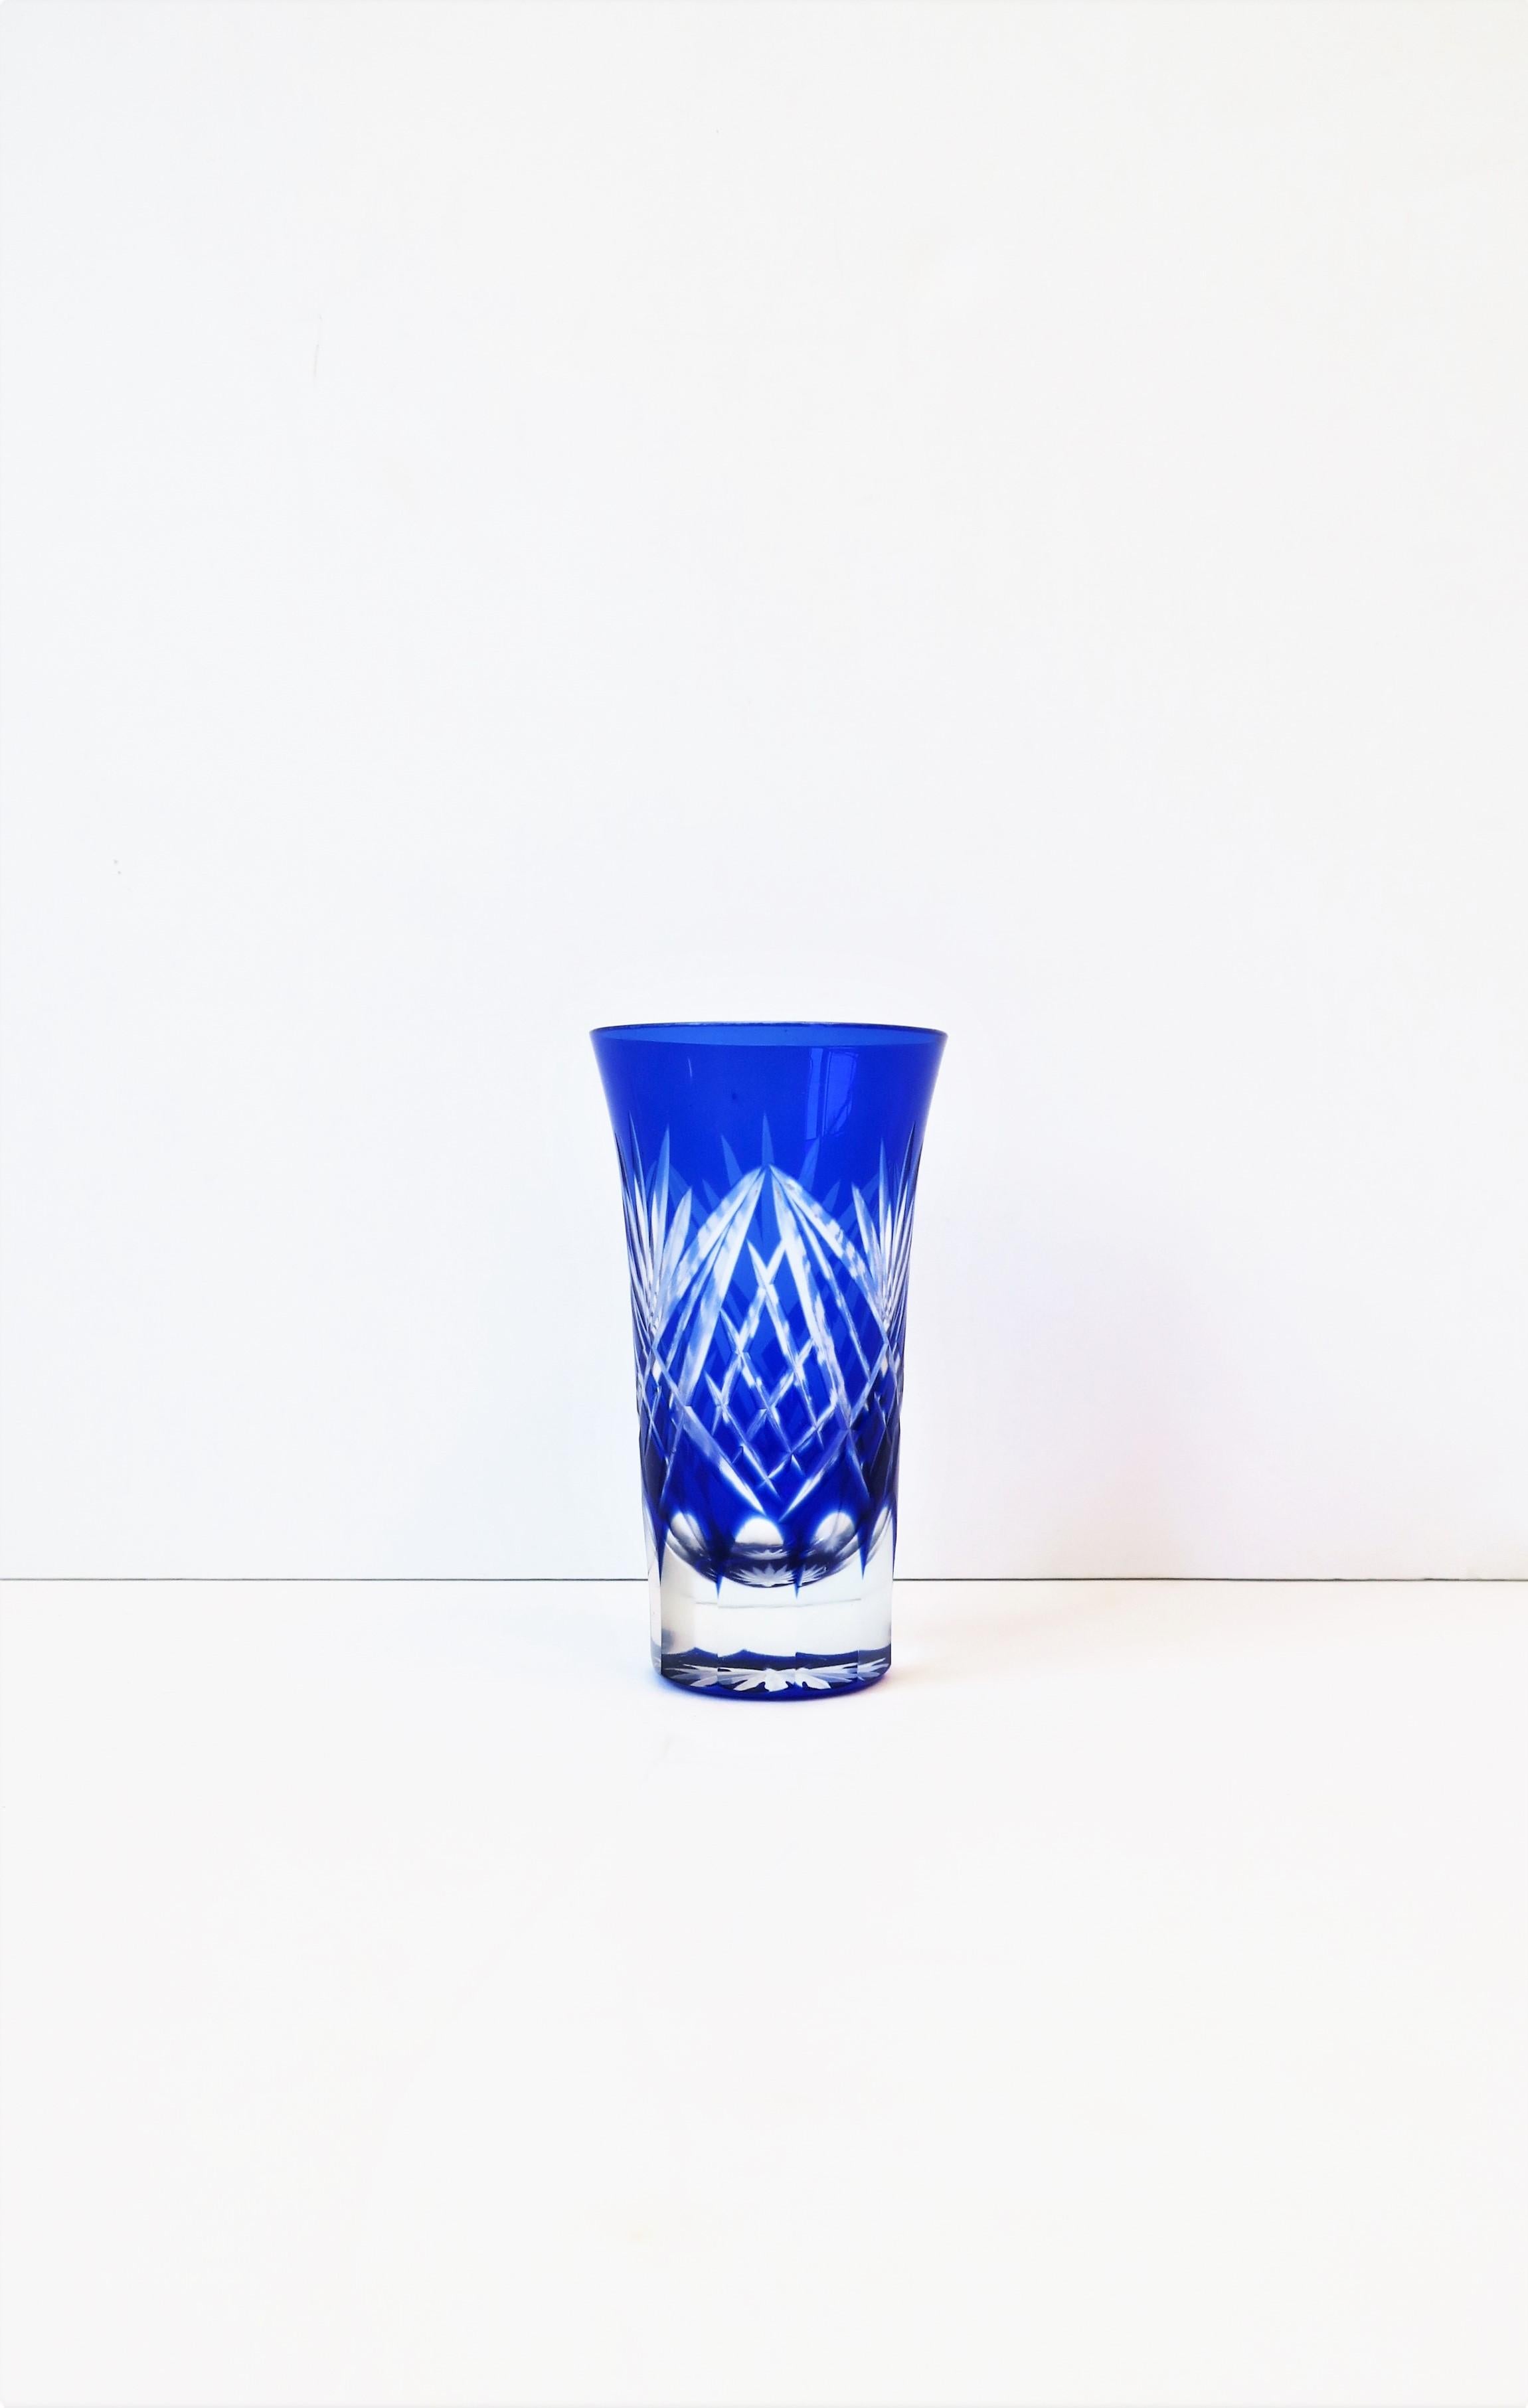 A beautiful Czech royal or cobalt blue Bohemian cut crystal drinking vessel or small vase, circa early to mid-20th century, Czechoslovakia. A beautiful piece with cut details from top to bottom, aka cut to clear. Piece is attributed to luxury